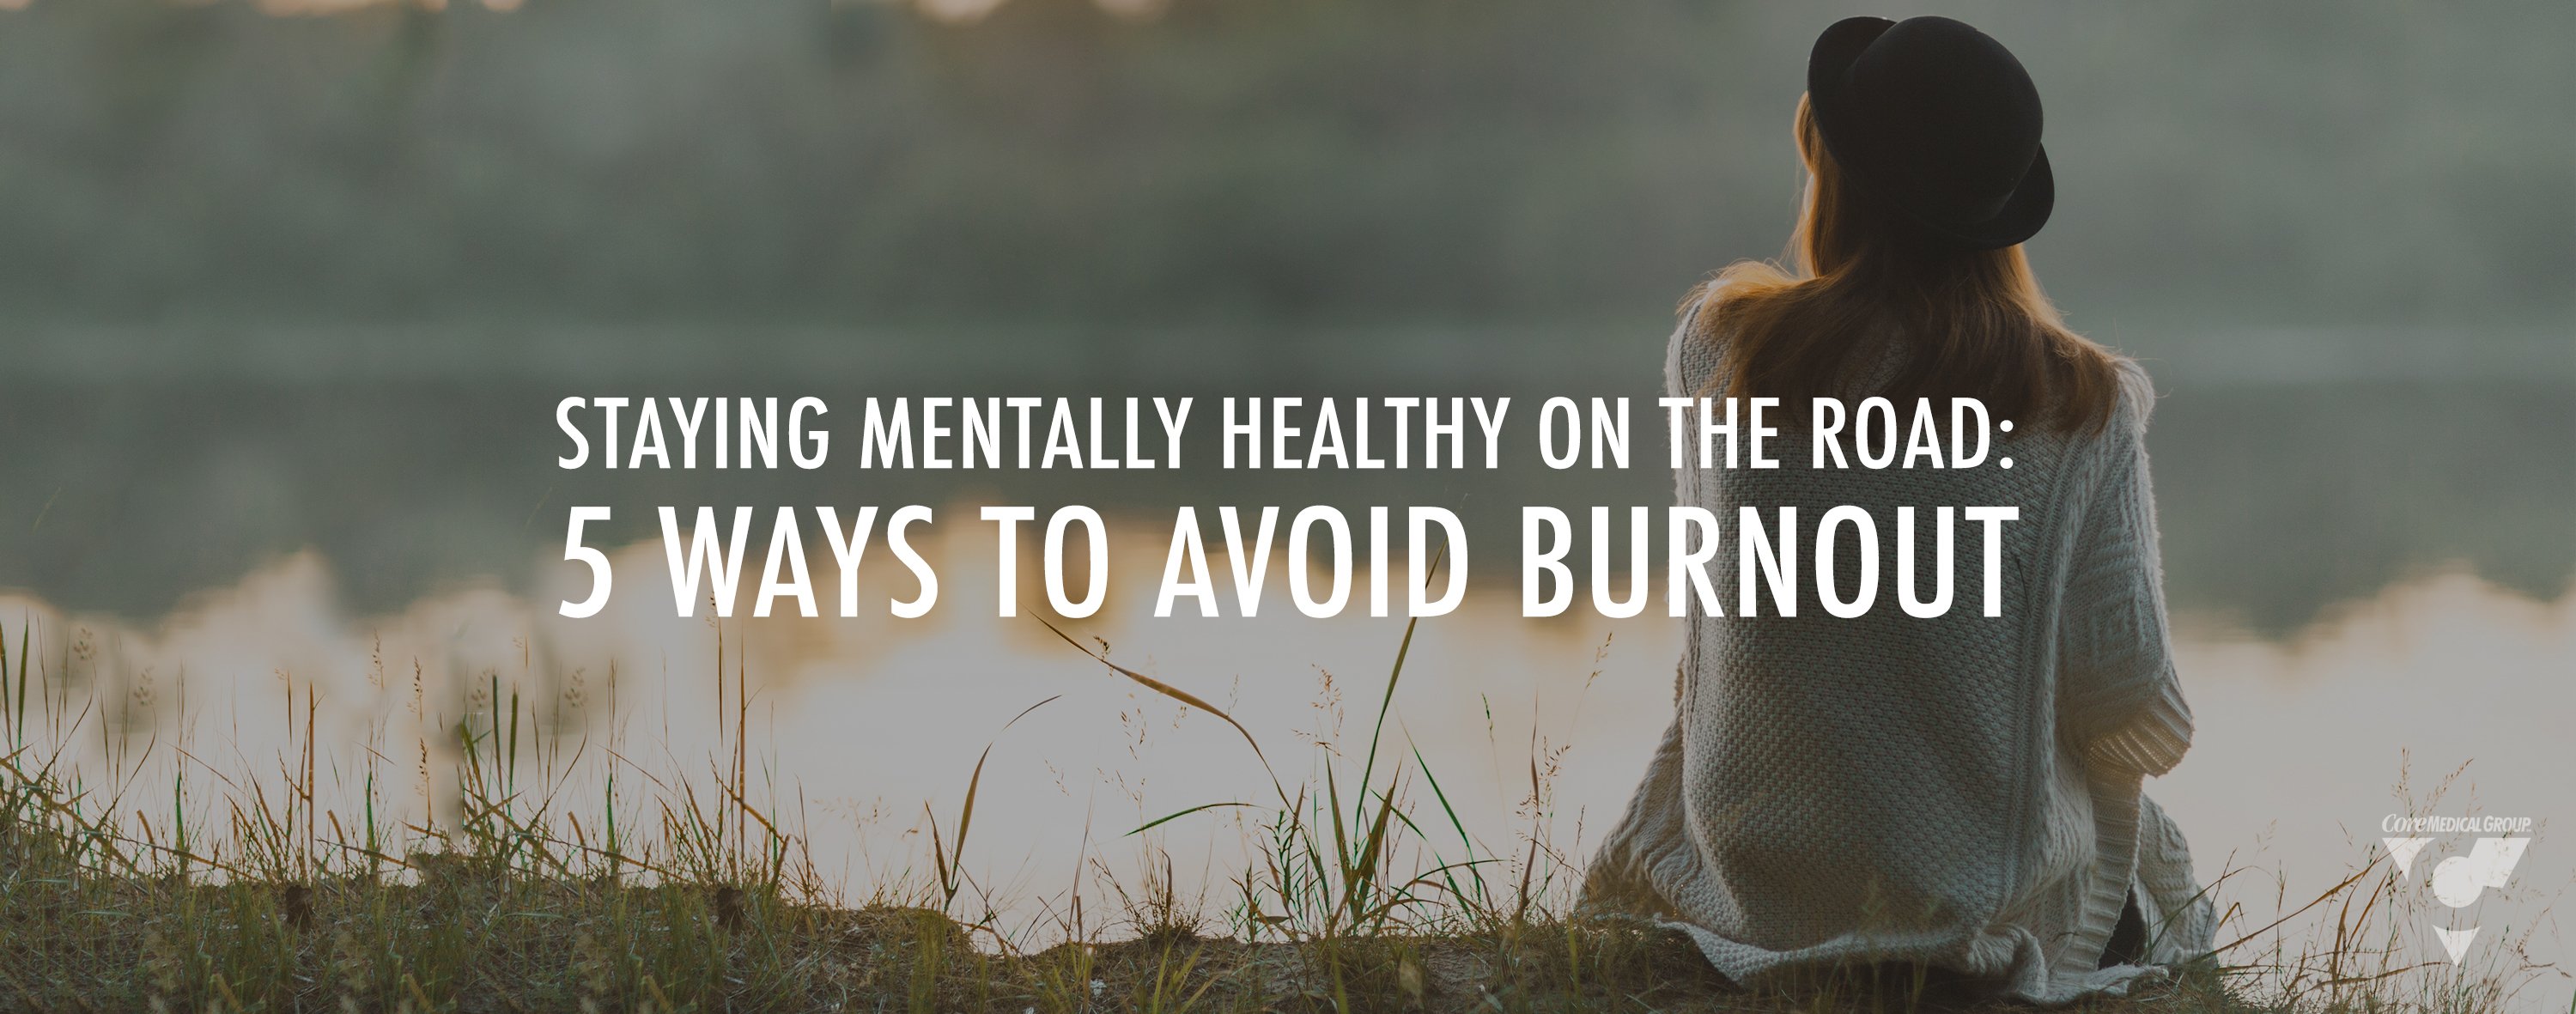 Travel Nursing Staying Mentally Healthy on the Road Five Ways to Avoid Burnout